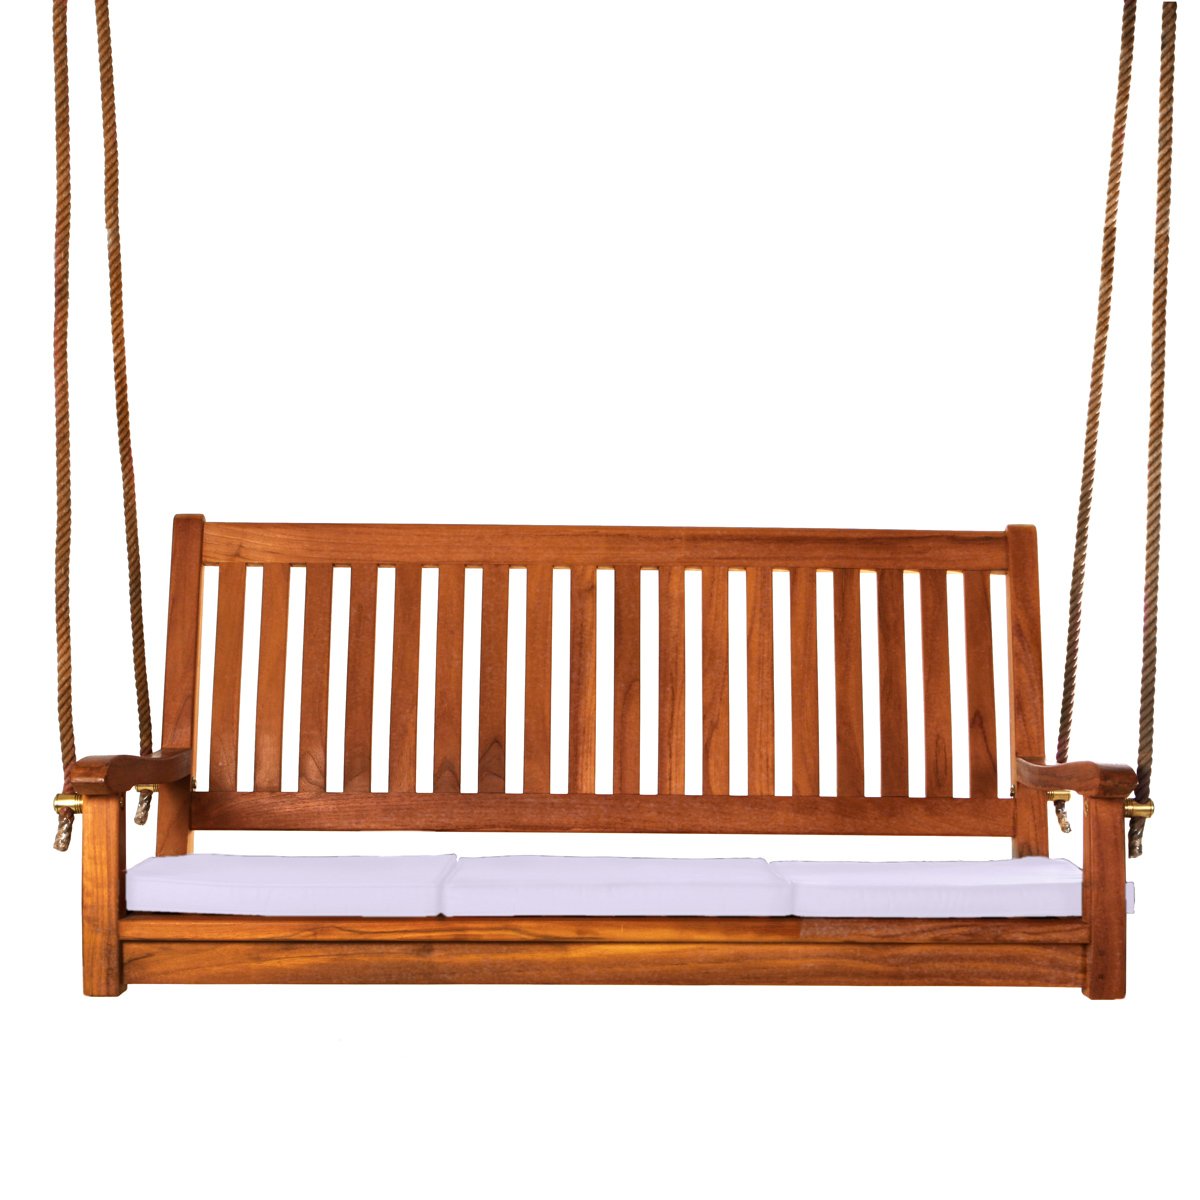 Teak Swing with Cushions Porch Swing Royal White